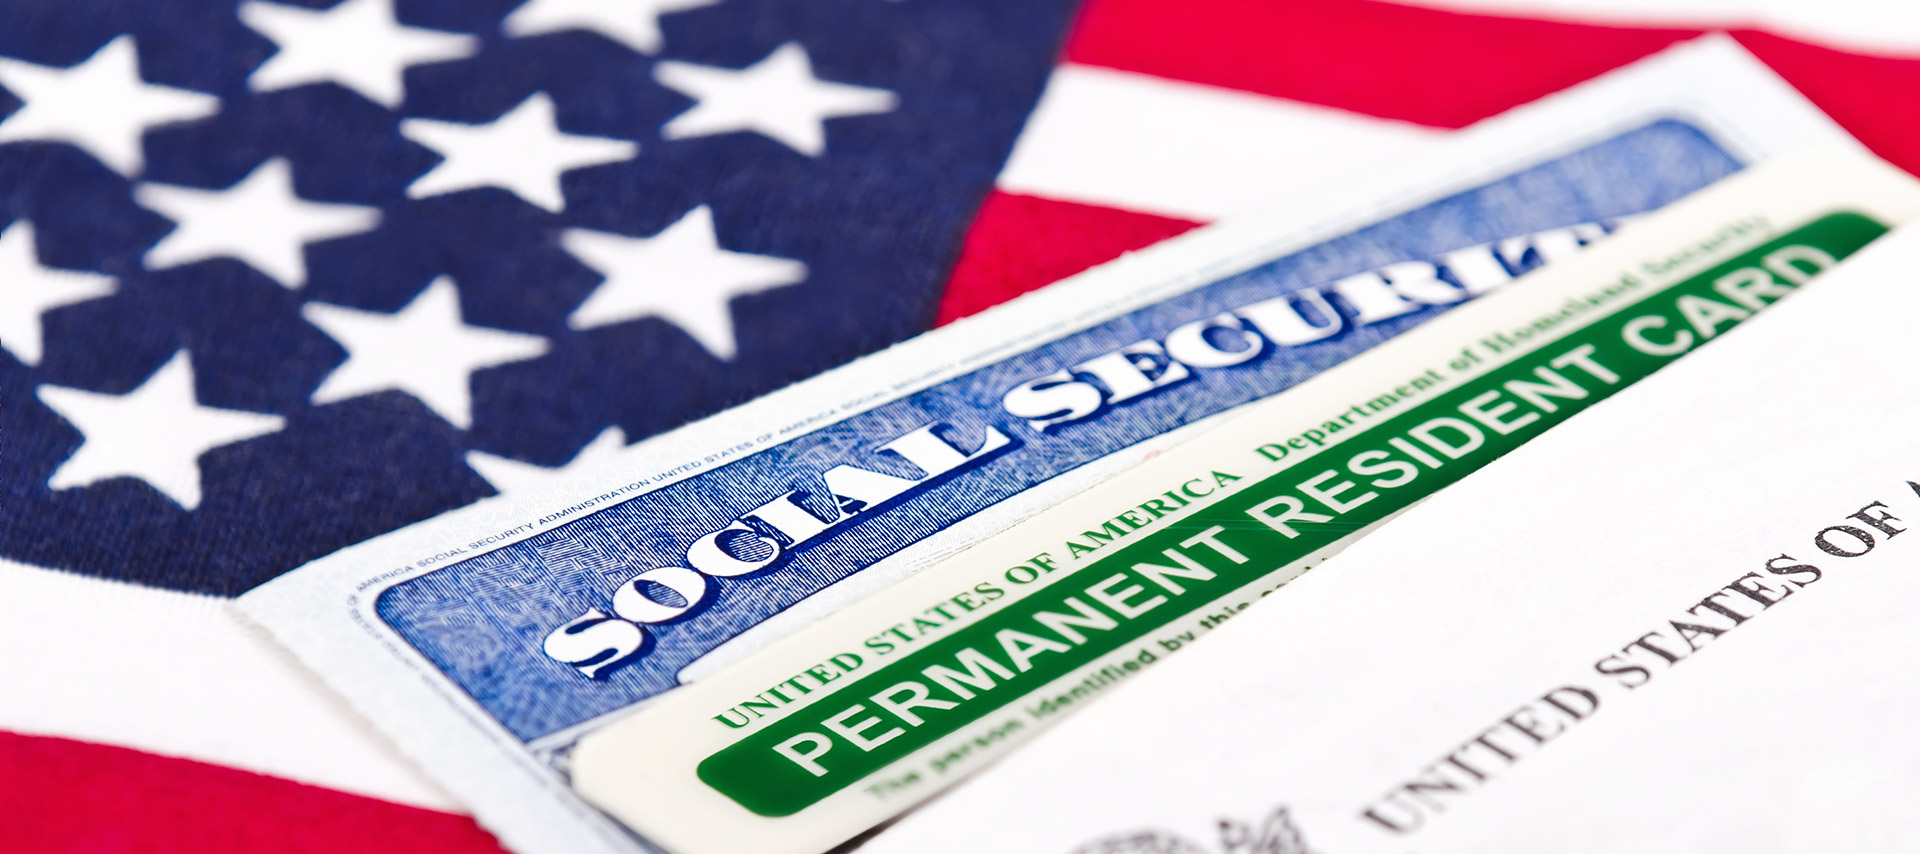 Methods of Applying for a Replacement Social Security Card